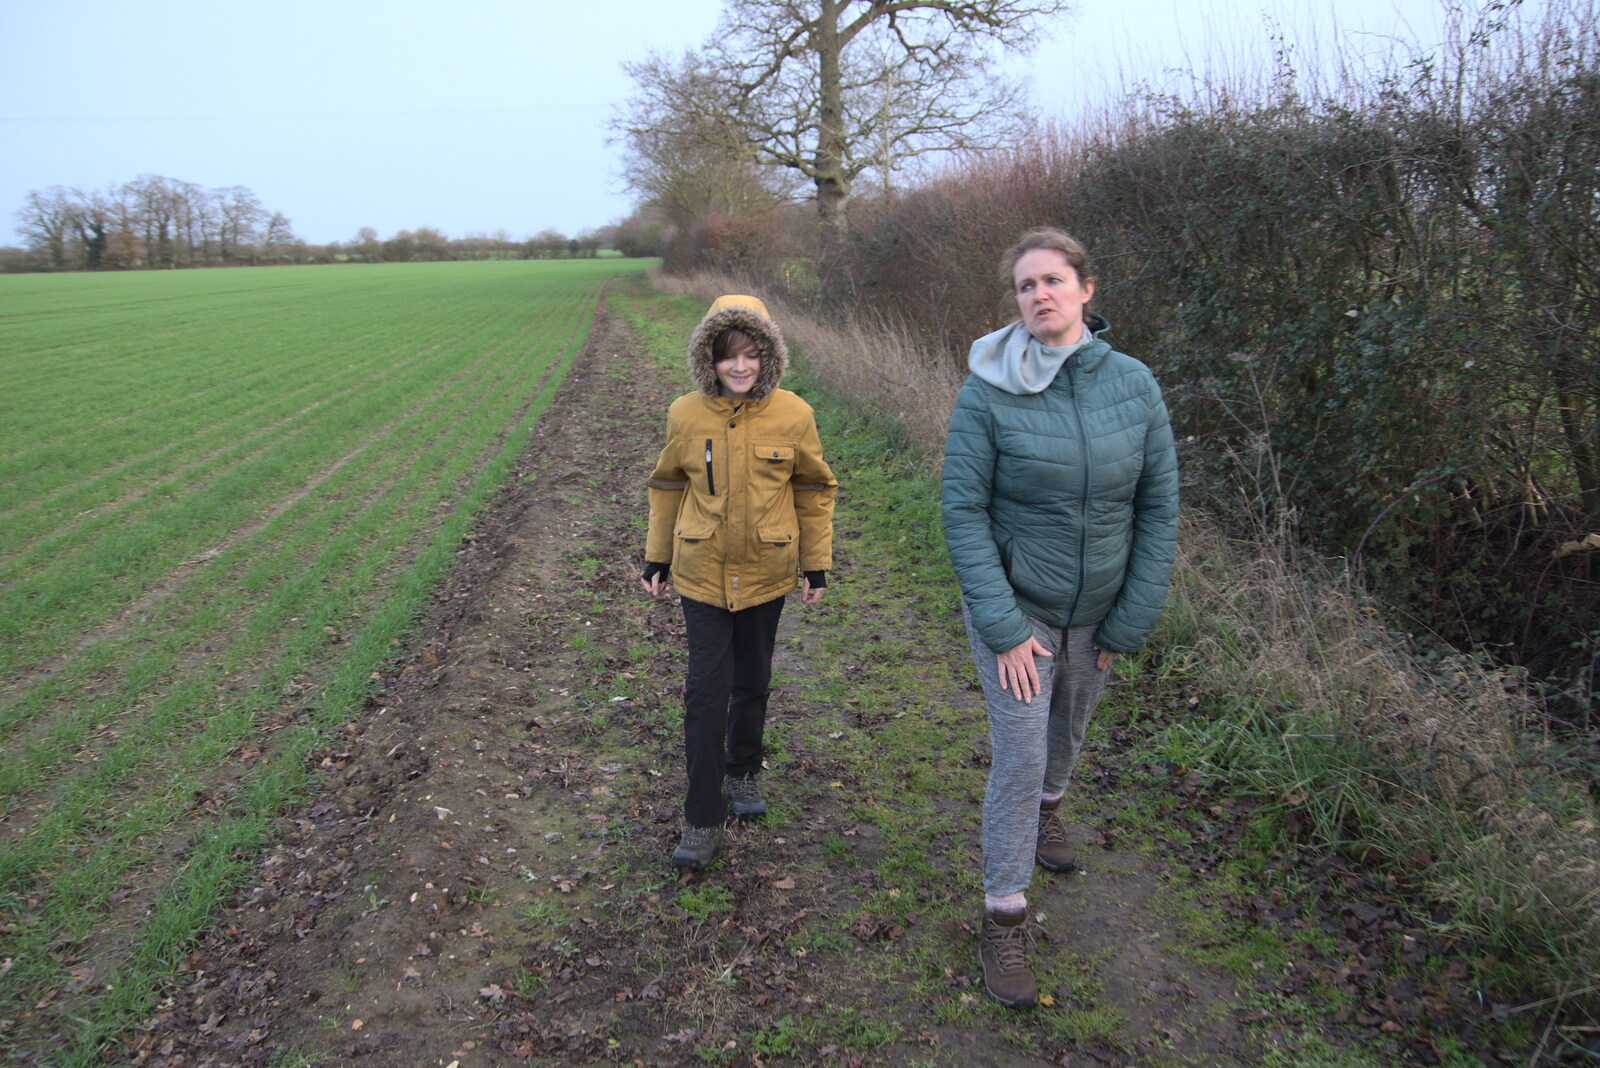 Winter Walks around Brome and Hoxne, Suffolk - 2nd January 2023: Harry and Isobel again